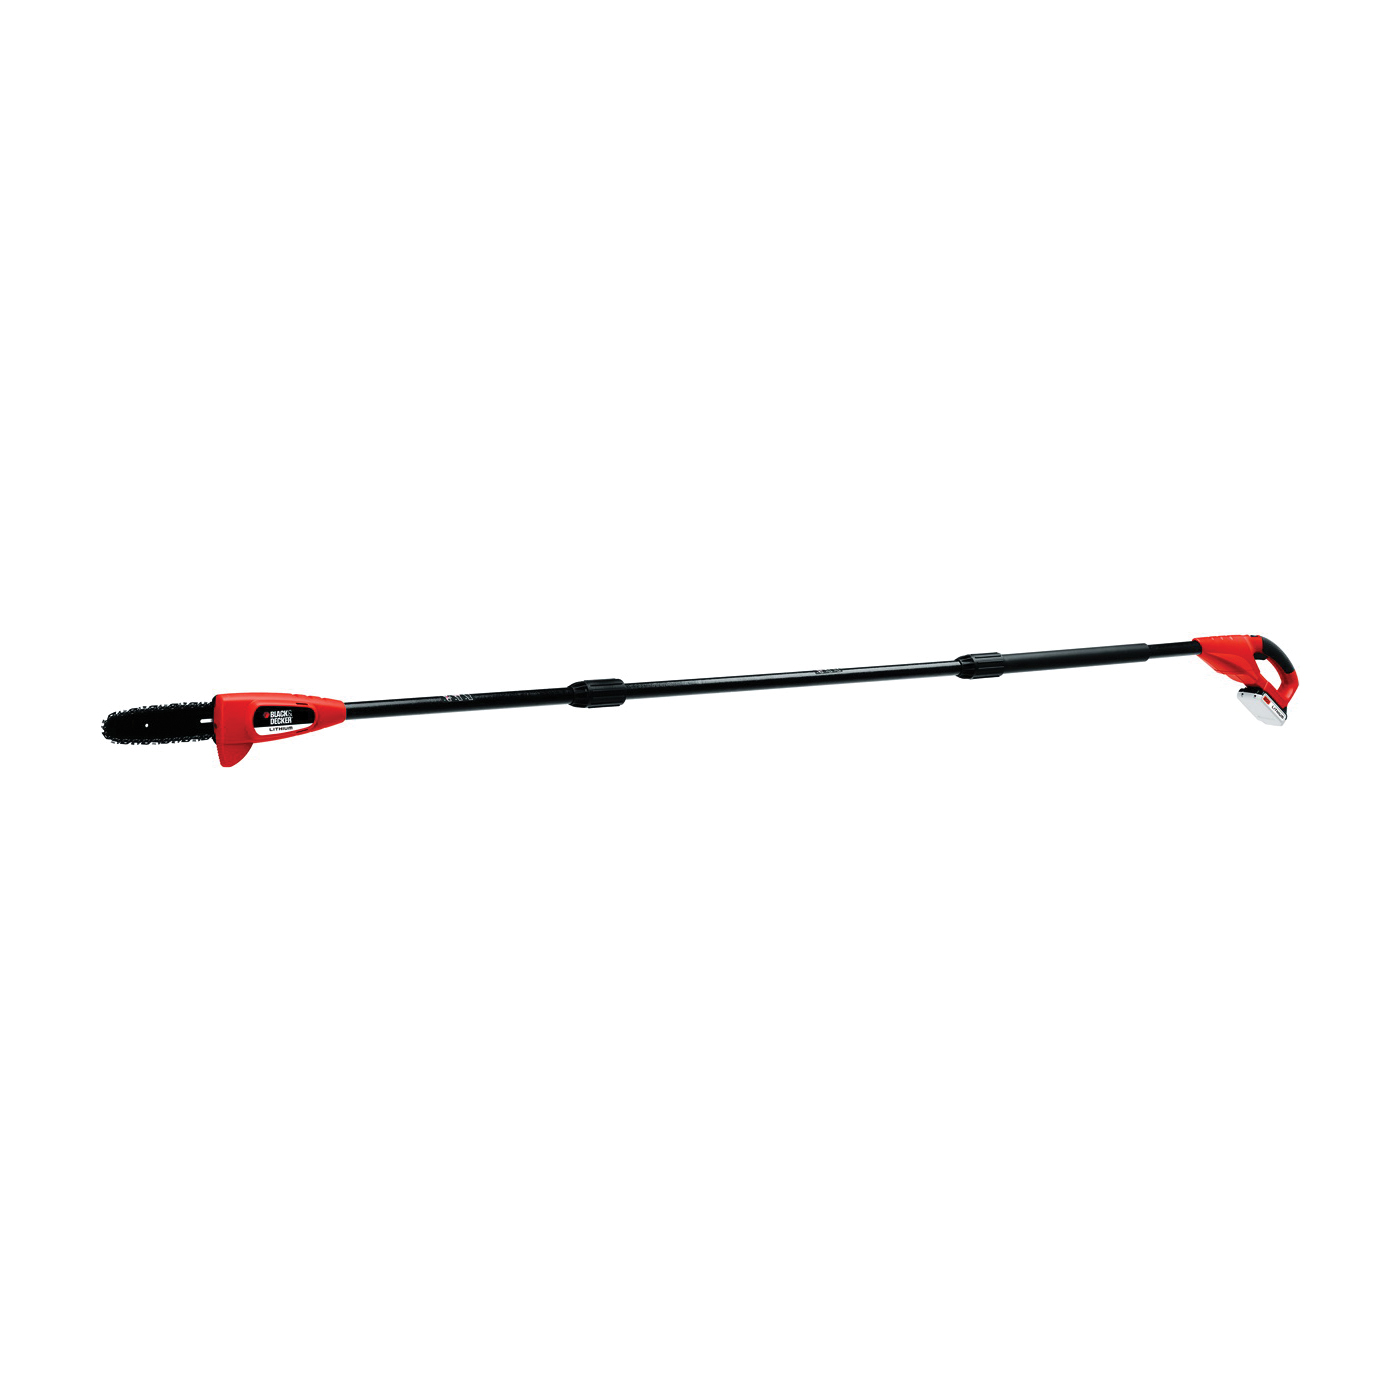 LPP120 Pole Pruning Saw, 20 V, 8 in Blade, 115 in OAL